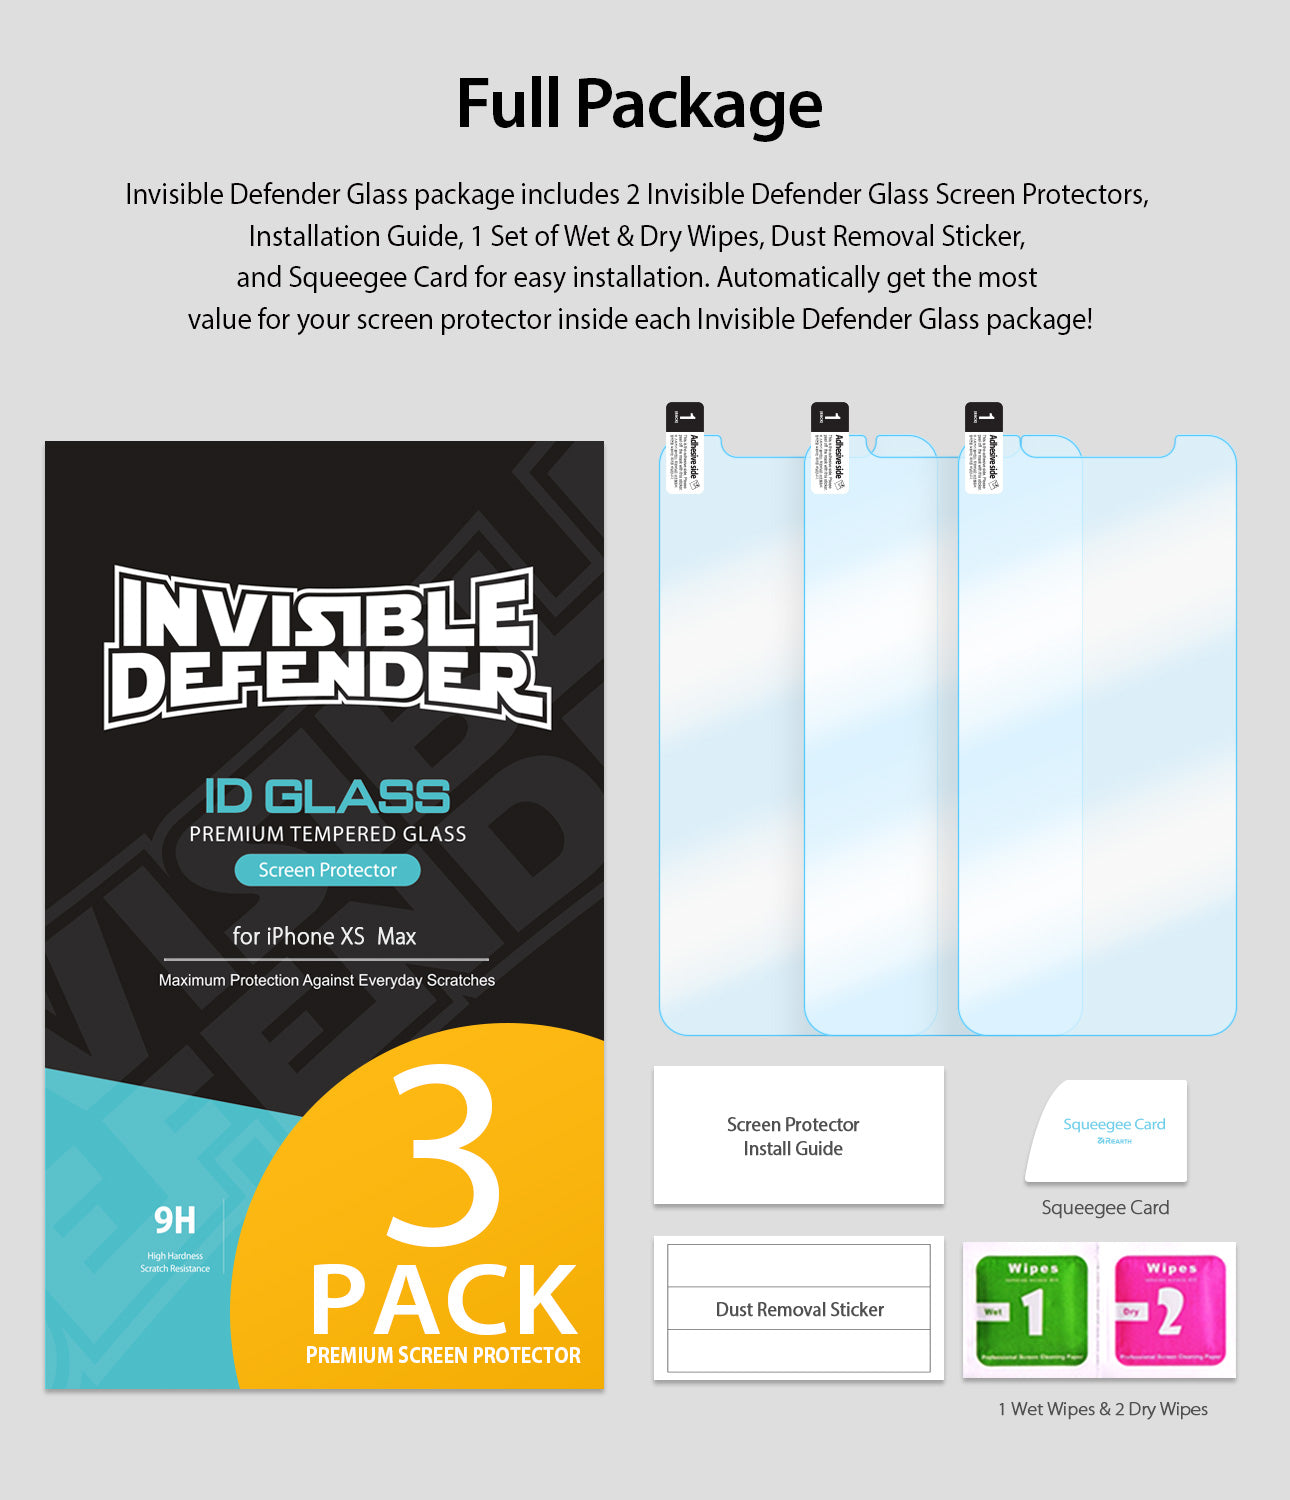 iPhone XS Max Screen Protector | Invisible Defender Glass - Full Package